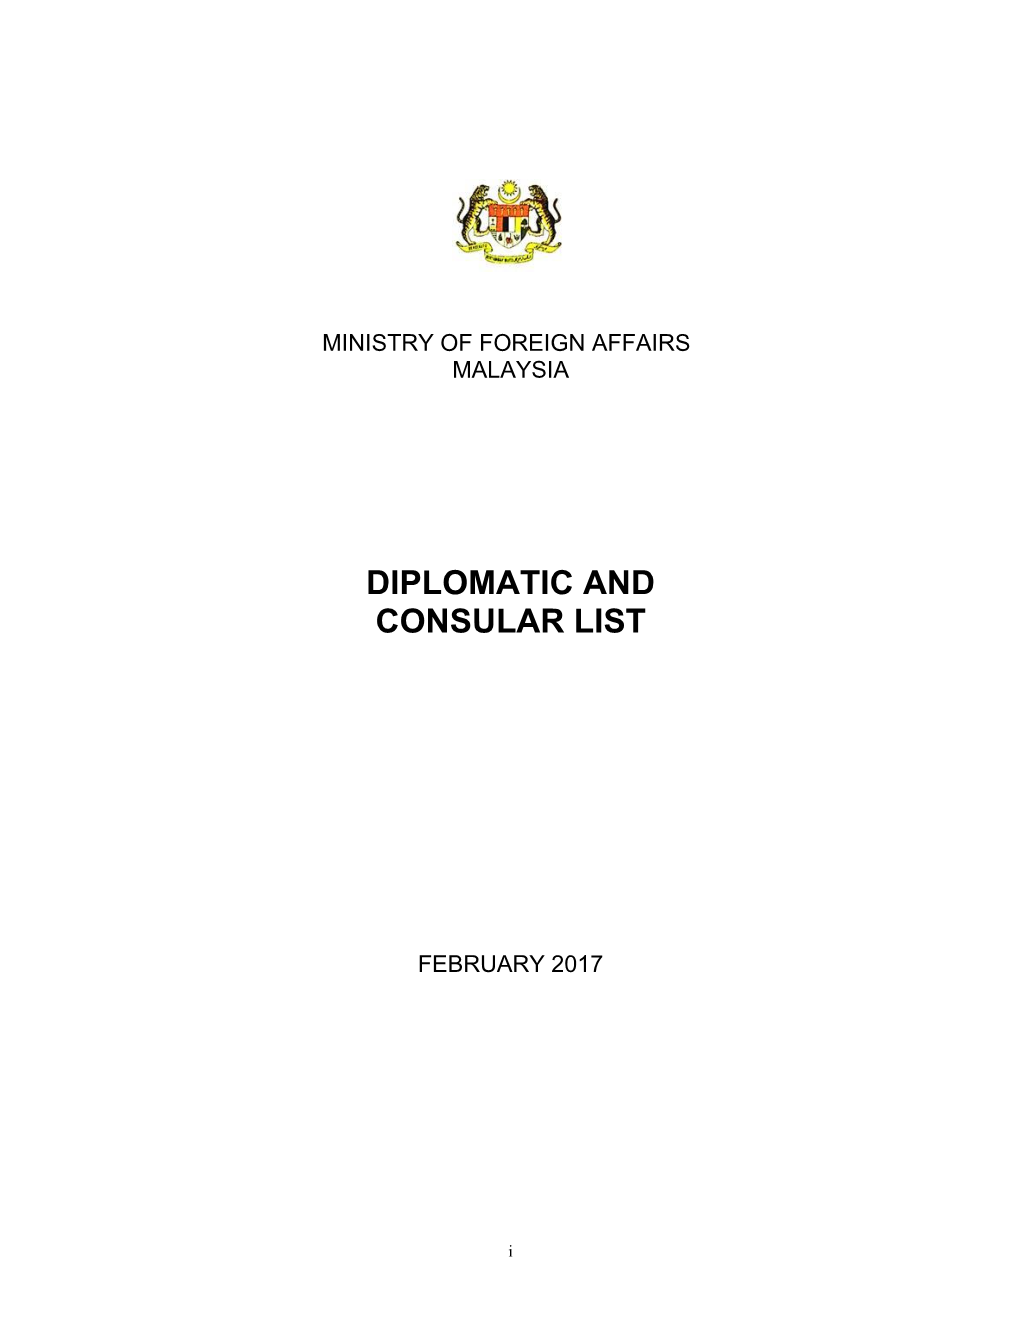 Diplomatic and Consular List